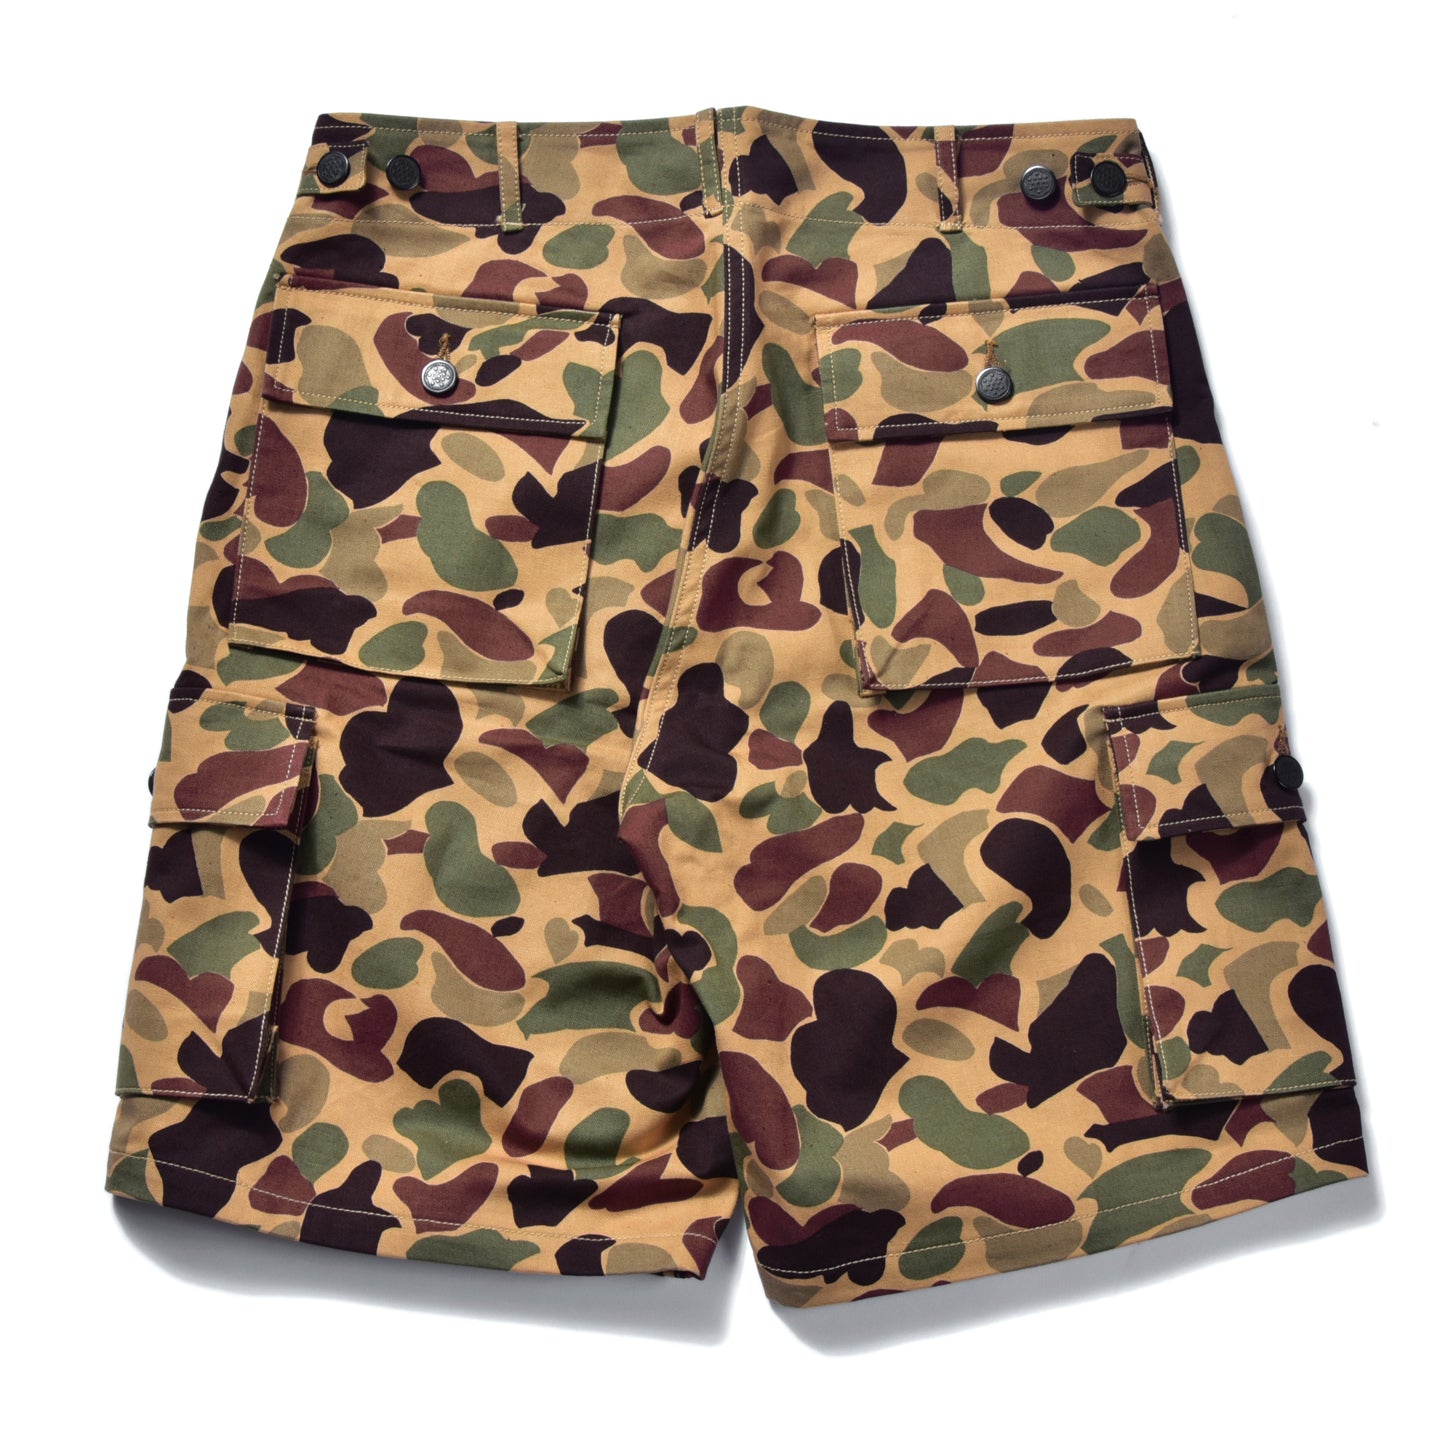 BEO GAM CAMOUFLAGE SHORTS – The Real McCoy's